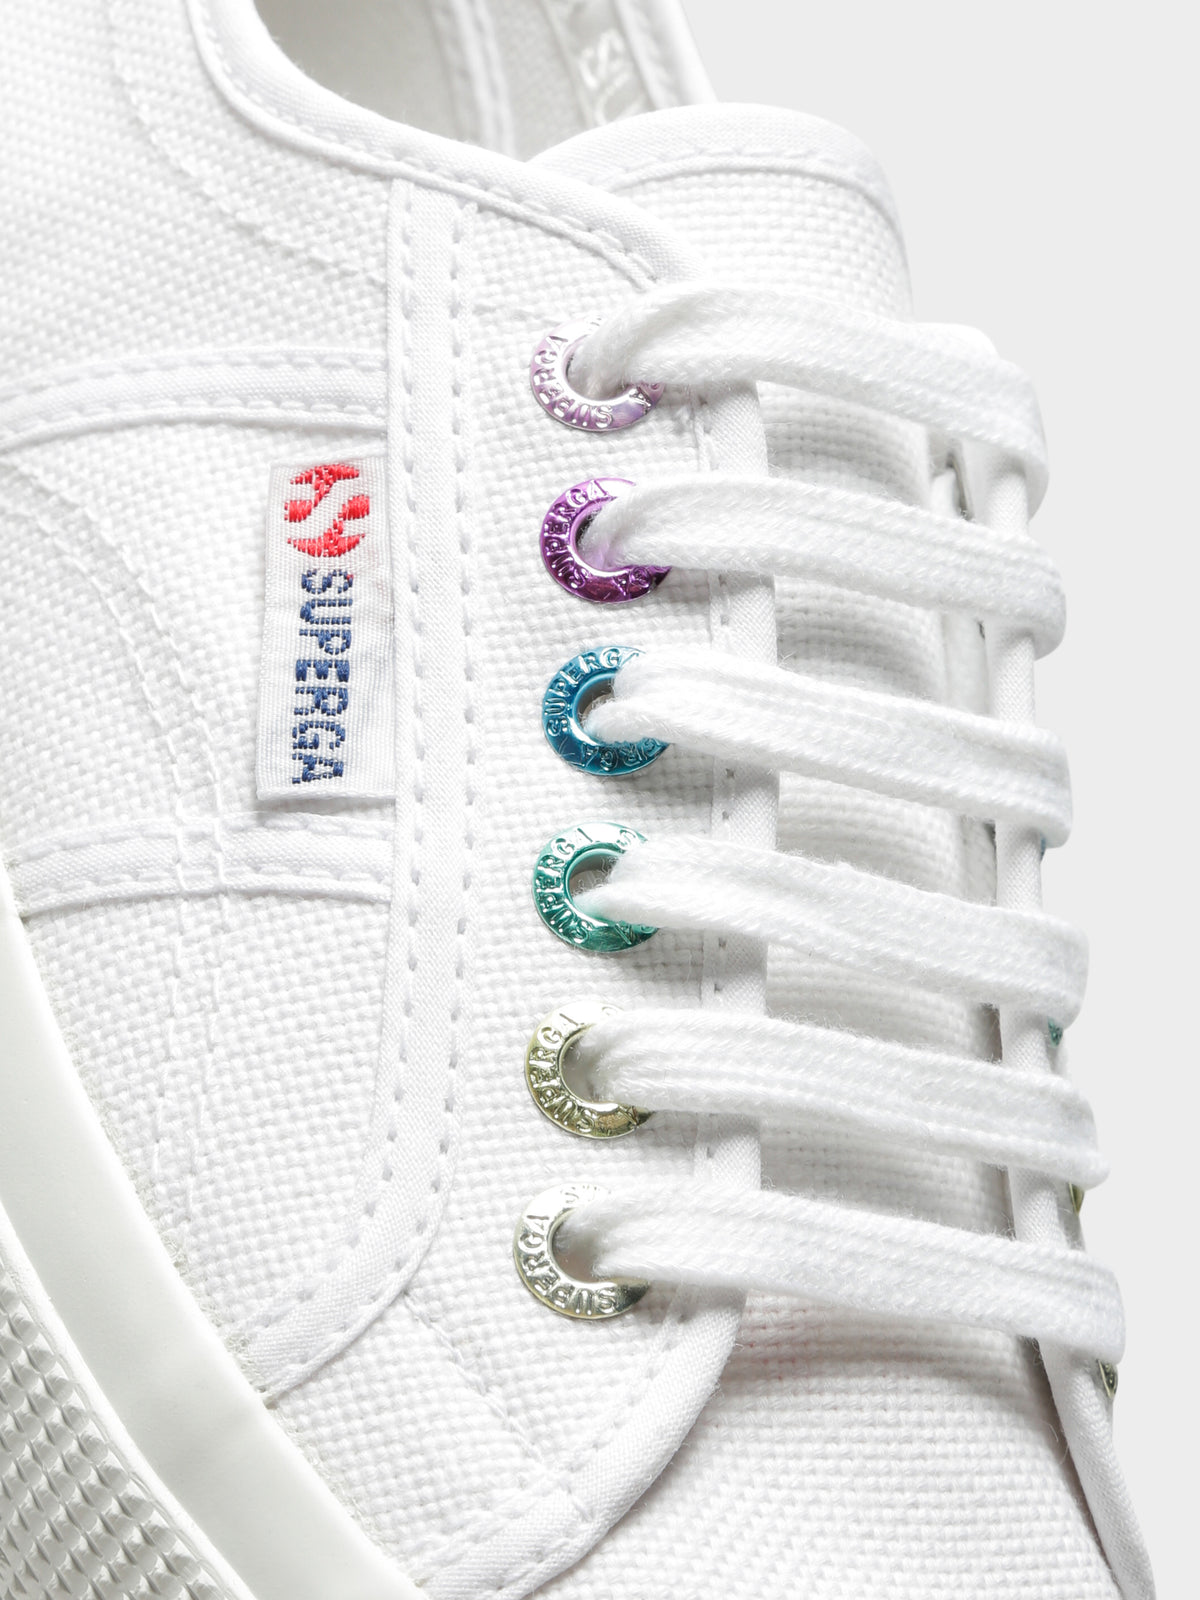 Womens 2750 Colourful Eyelets Sneakers in White